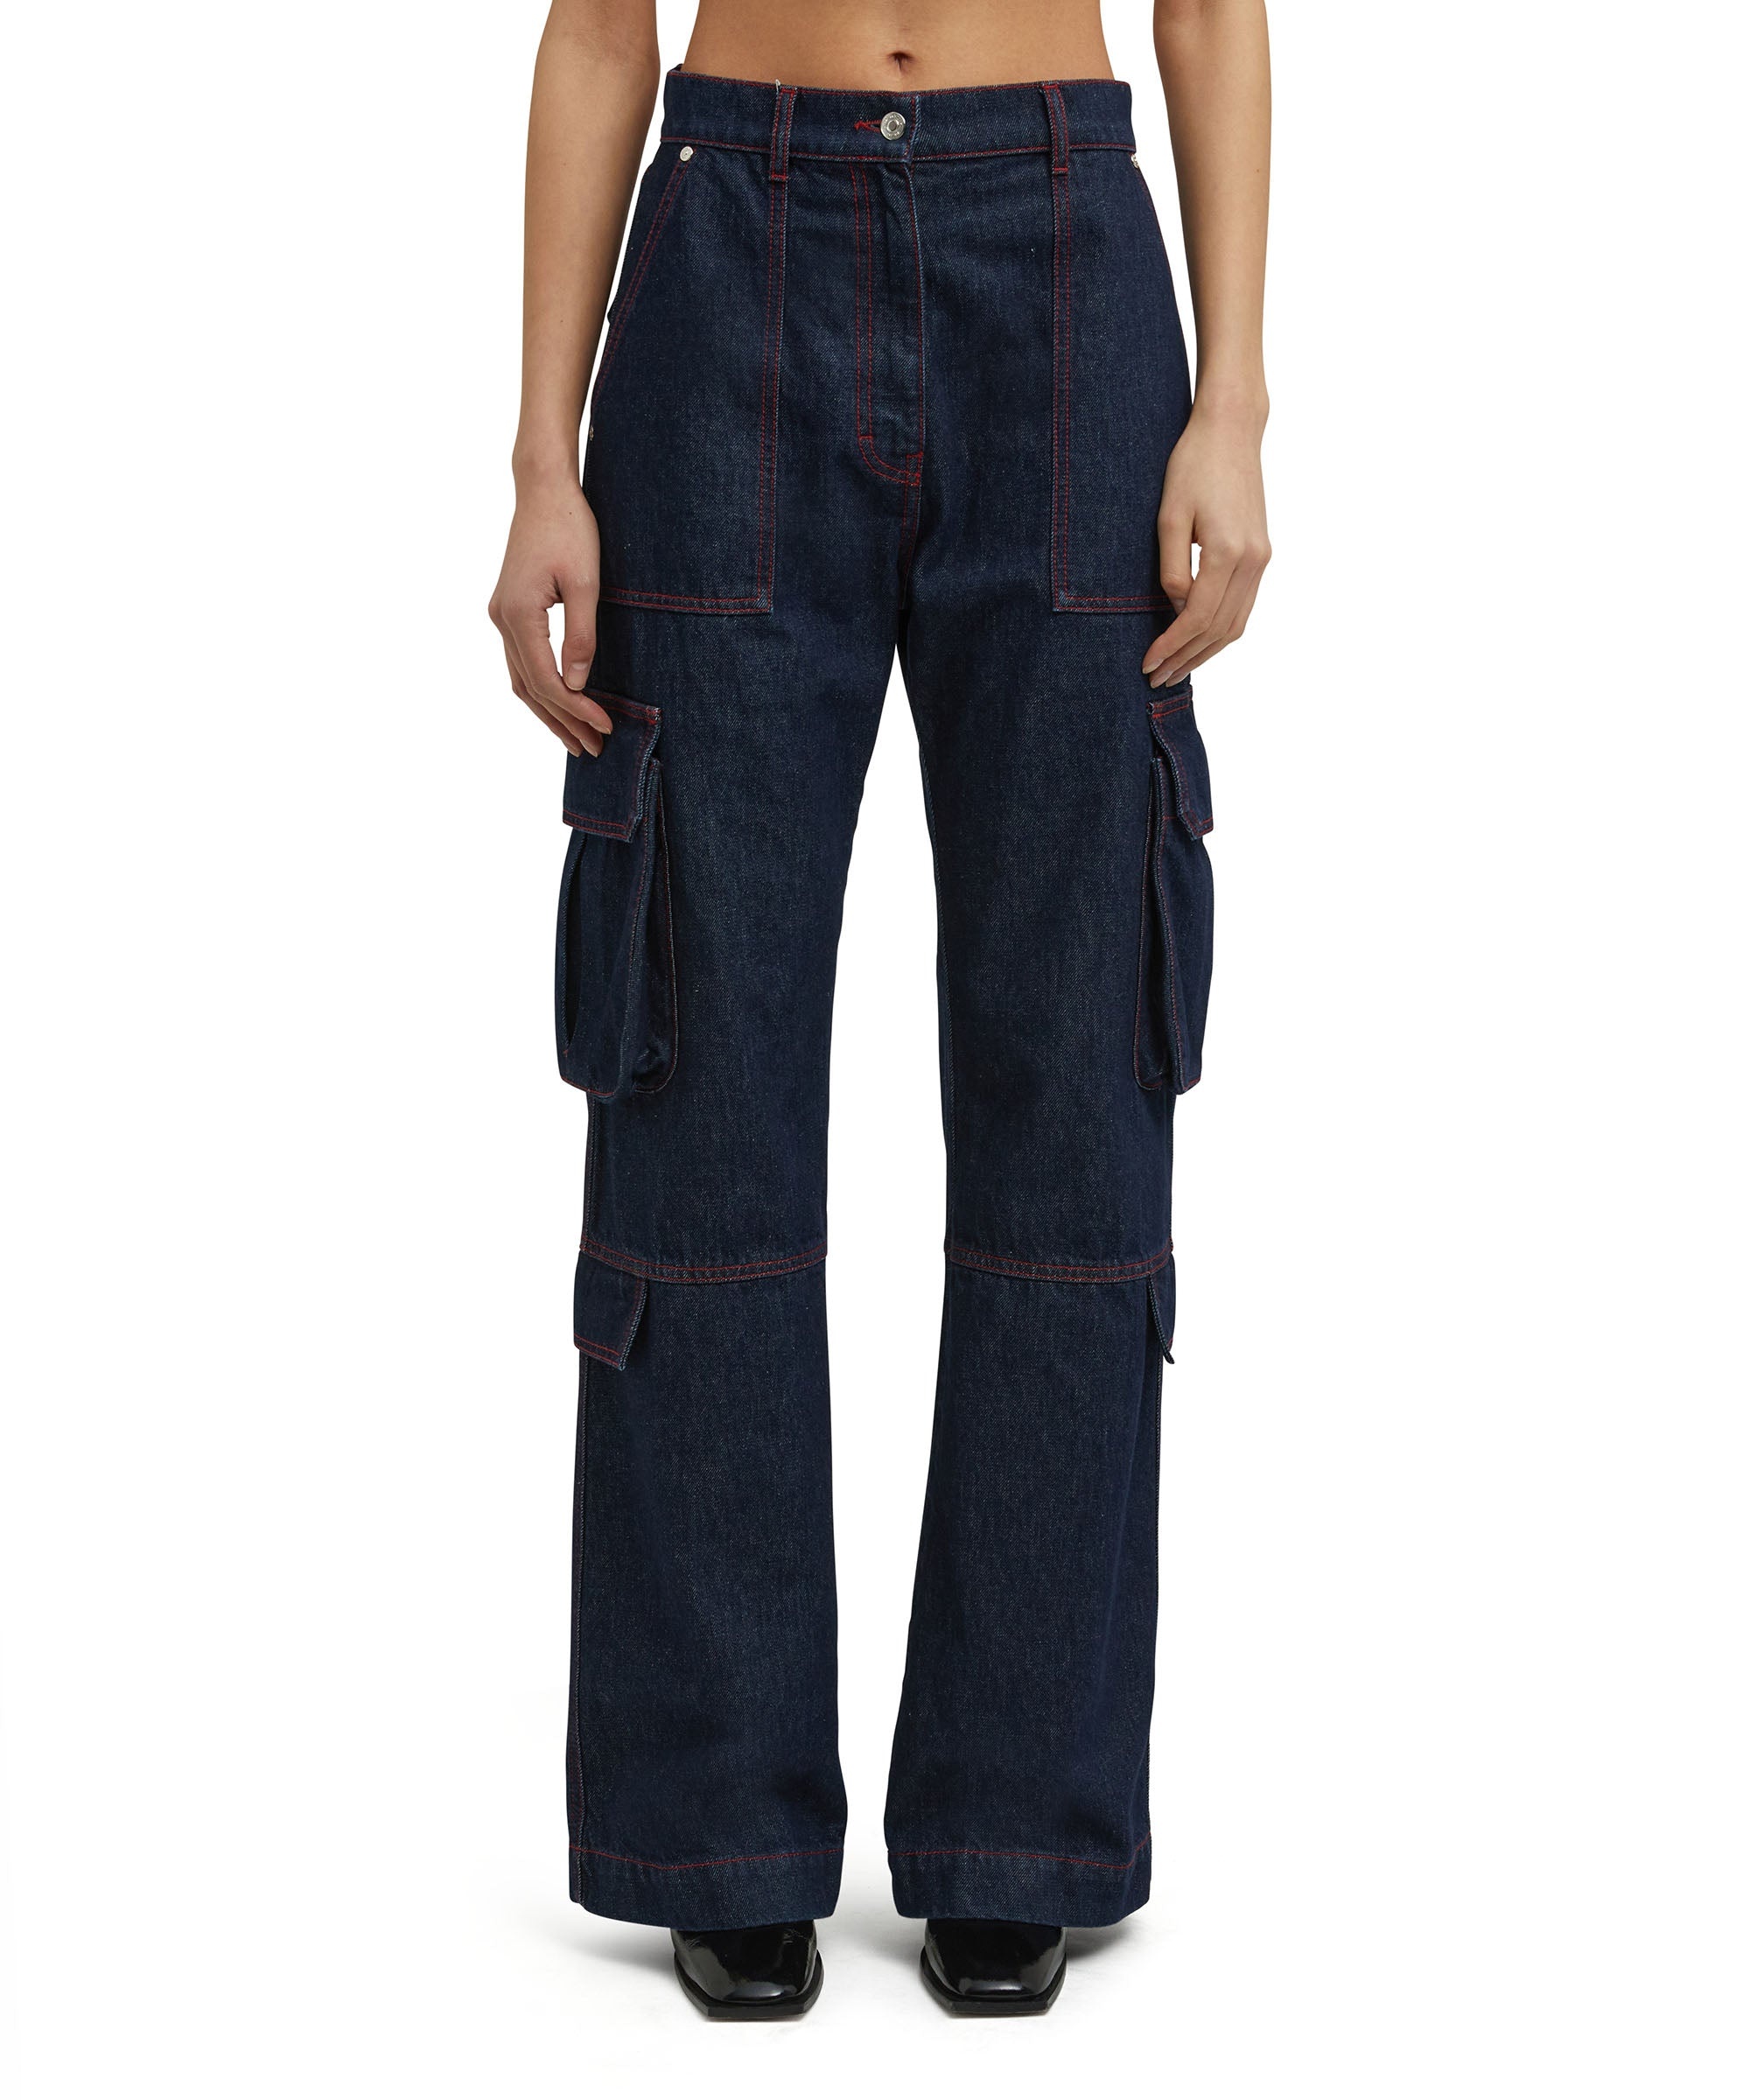 Cargo trousers with "Blue Denim with stitches" workmanship - 2